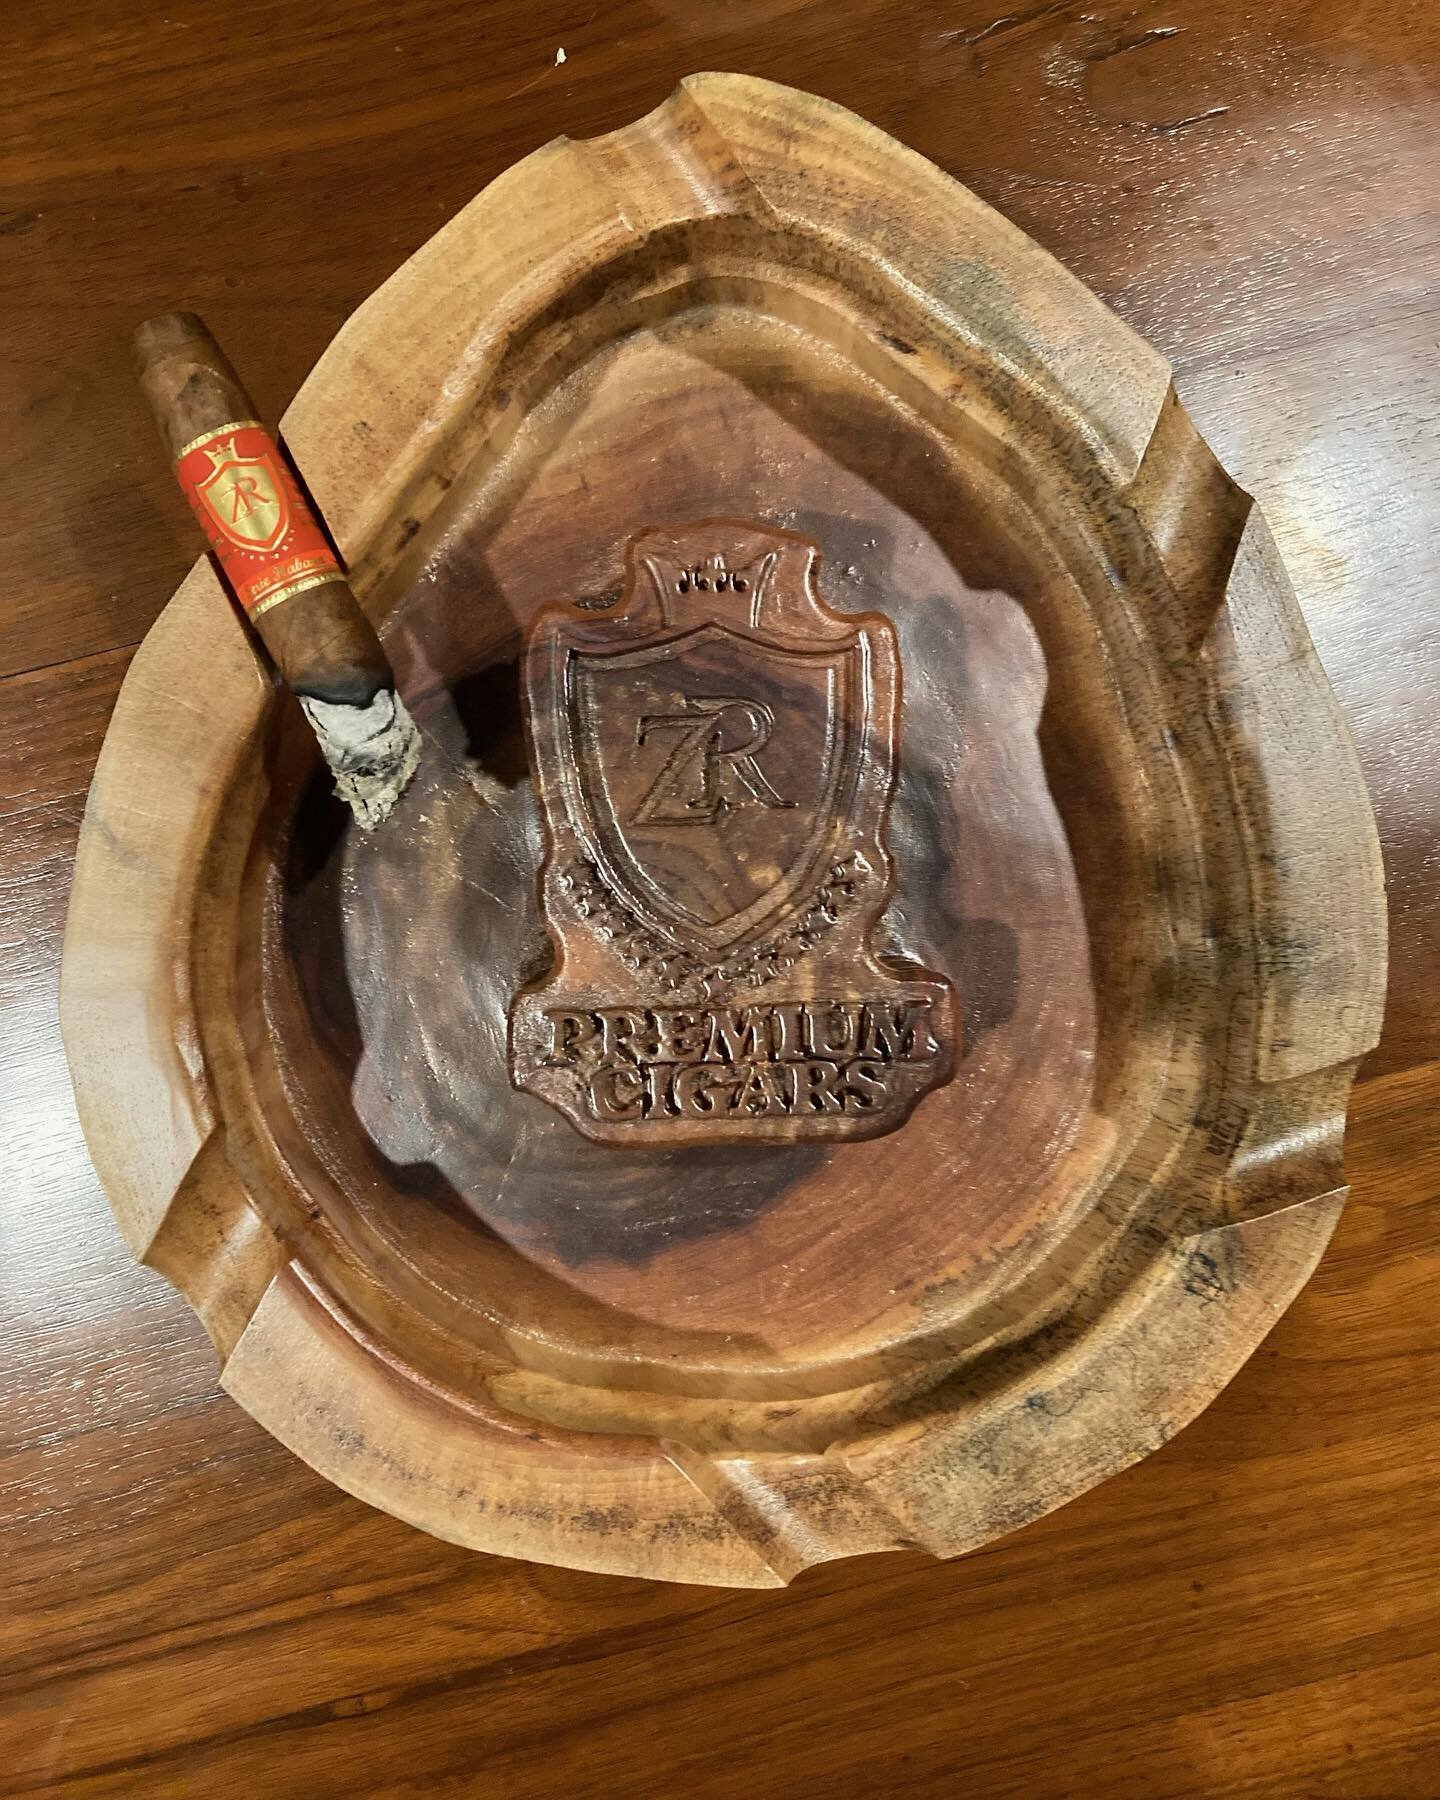 With ZR Cigars, quality is never an accident&hellip;

&hellip;a statement that applies to cigars AND ashtrays! Come check out this beauty and try a ZR Cigar!

@zrcigars

#exploregeorgia #pickellijay #ellijayga #ellijay #ellijaycigars #ellijaycigarlou